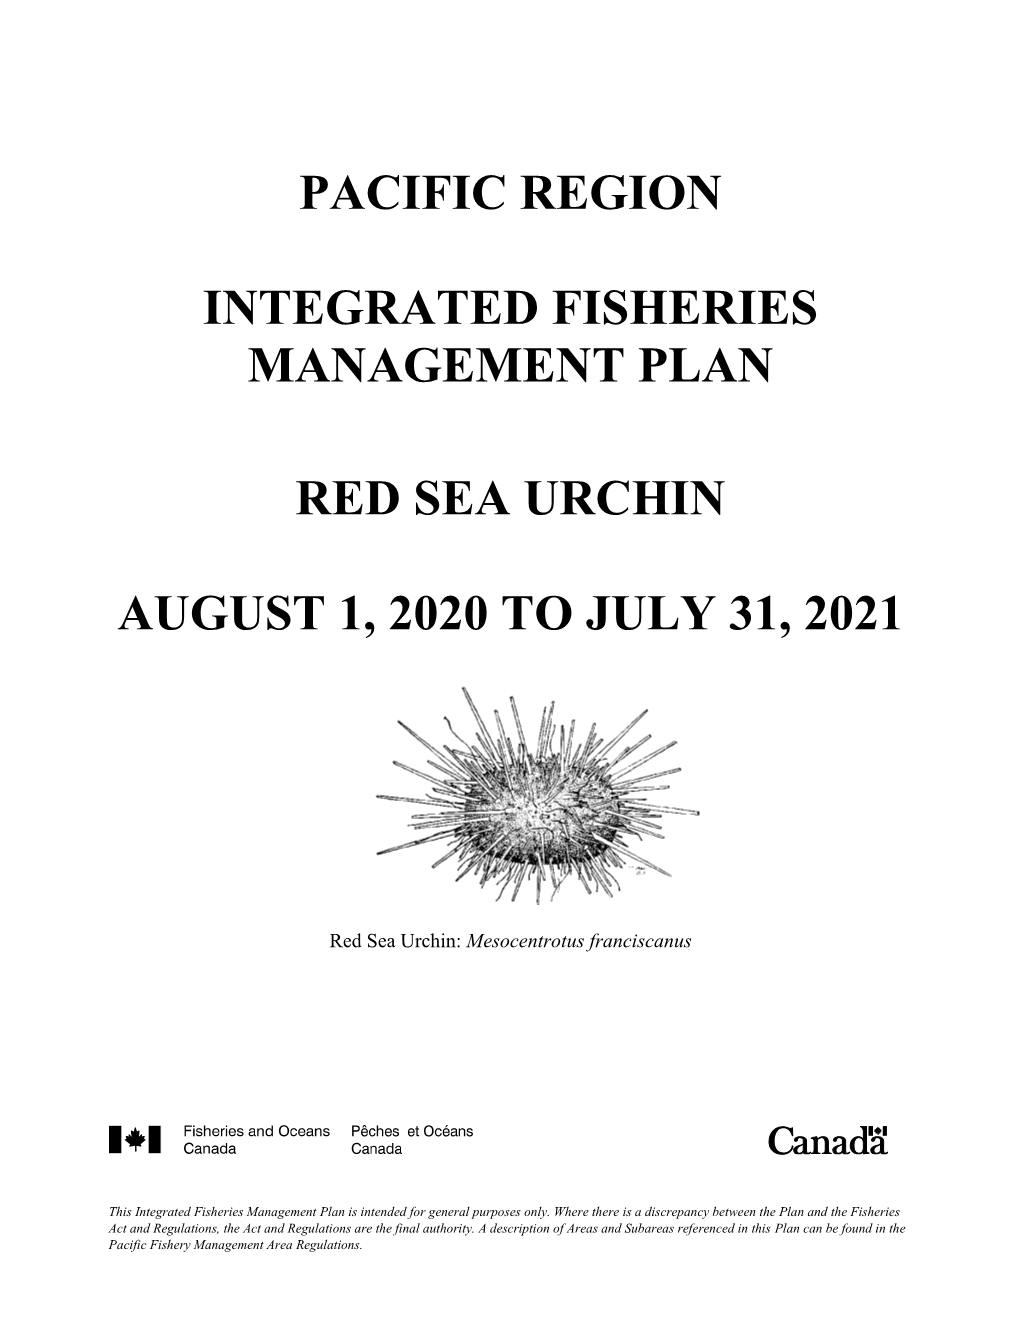 Pacific Region Integrated Fisheries Management Plan